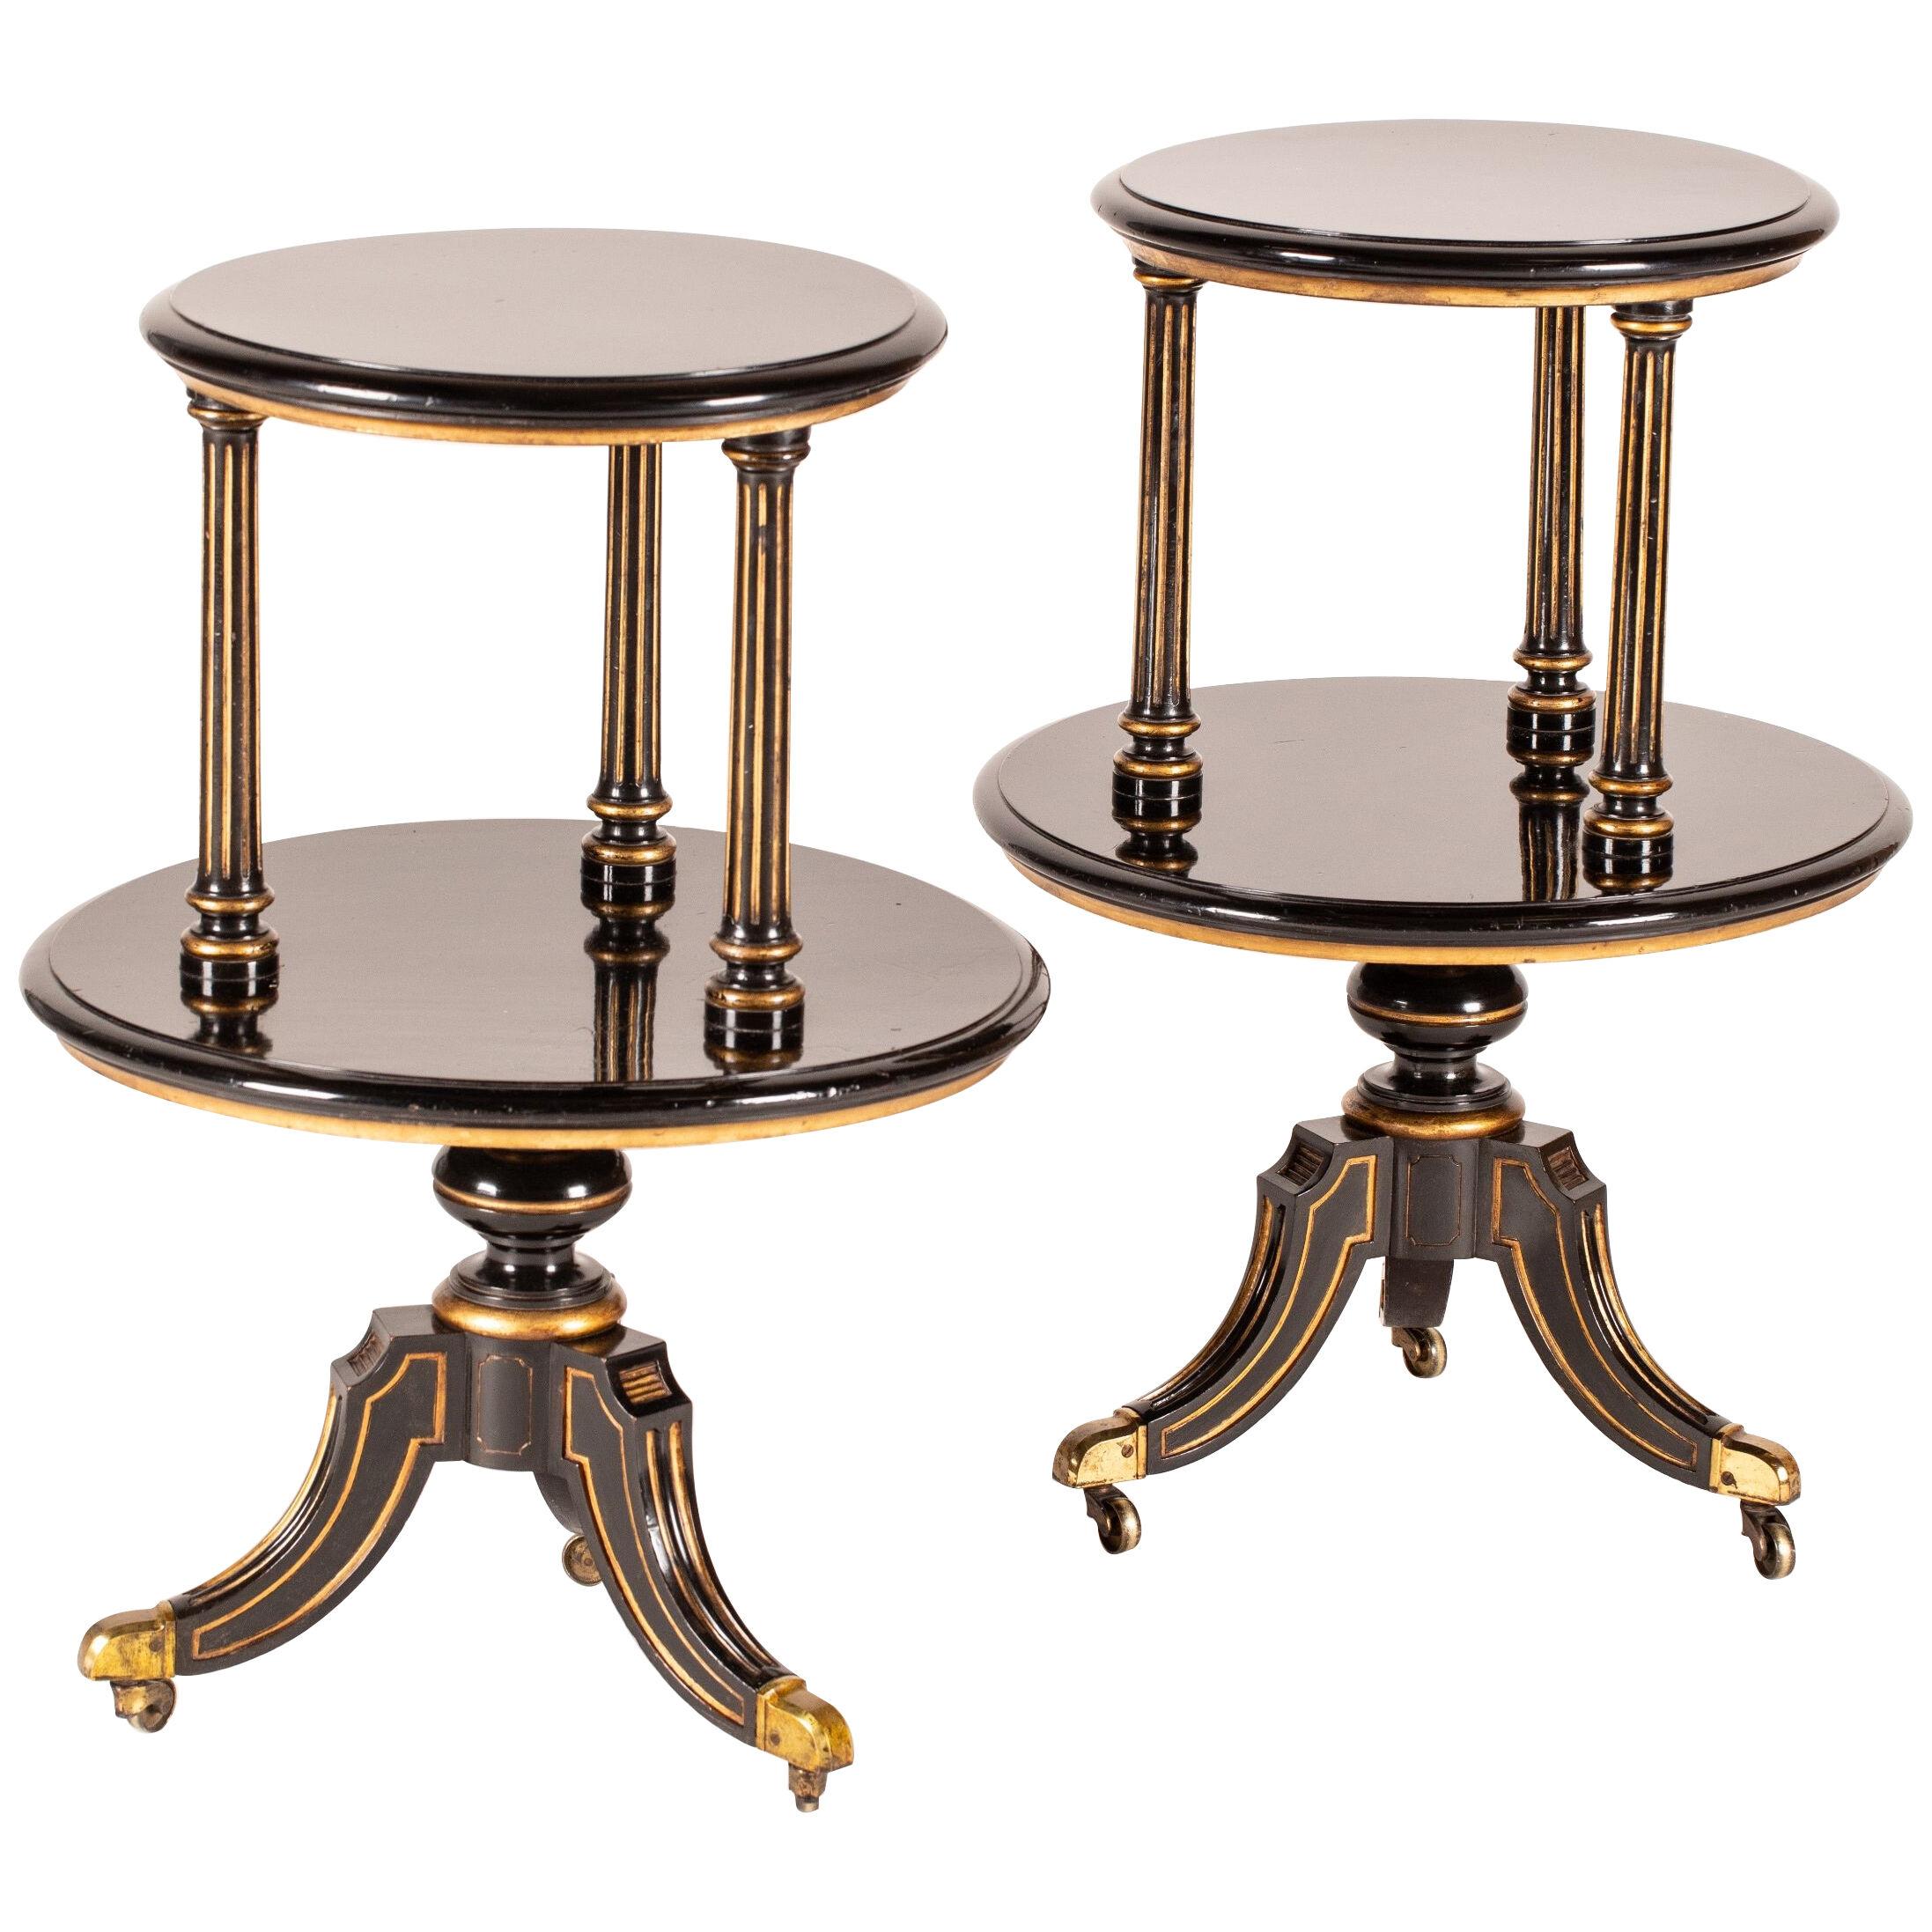 Pair of Aesthetic Movement Black Lacquer Tables